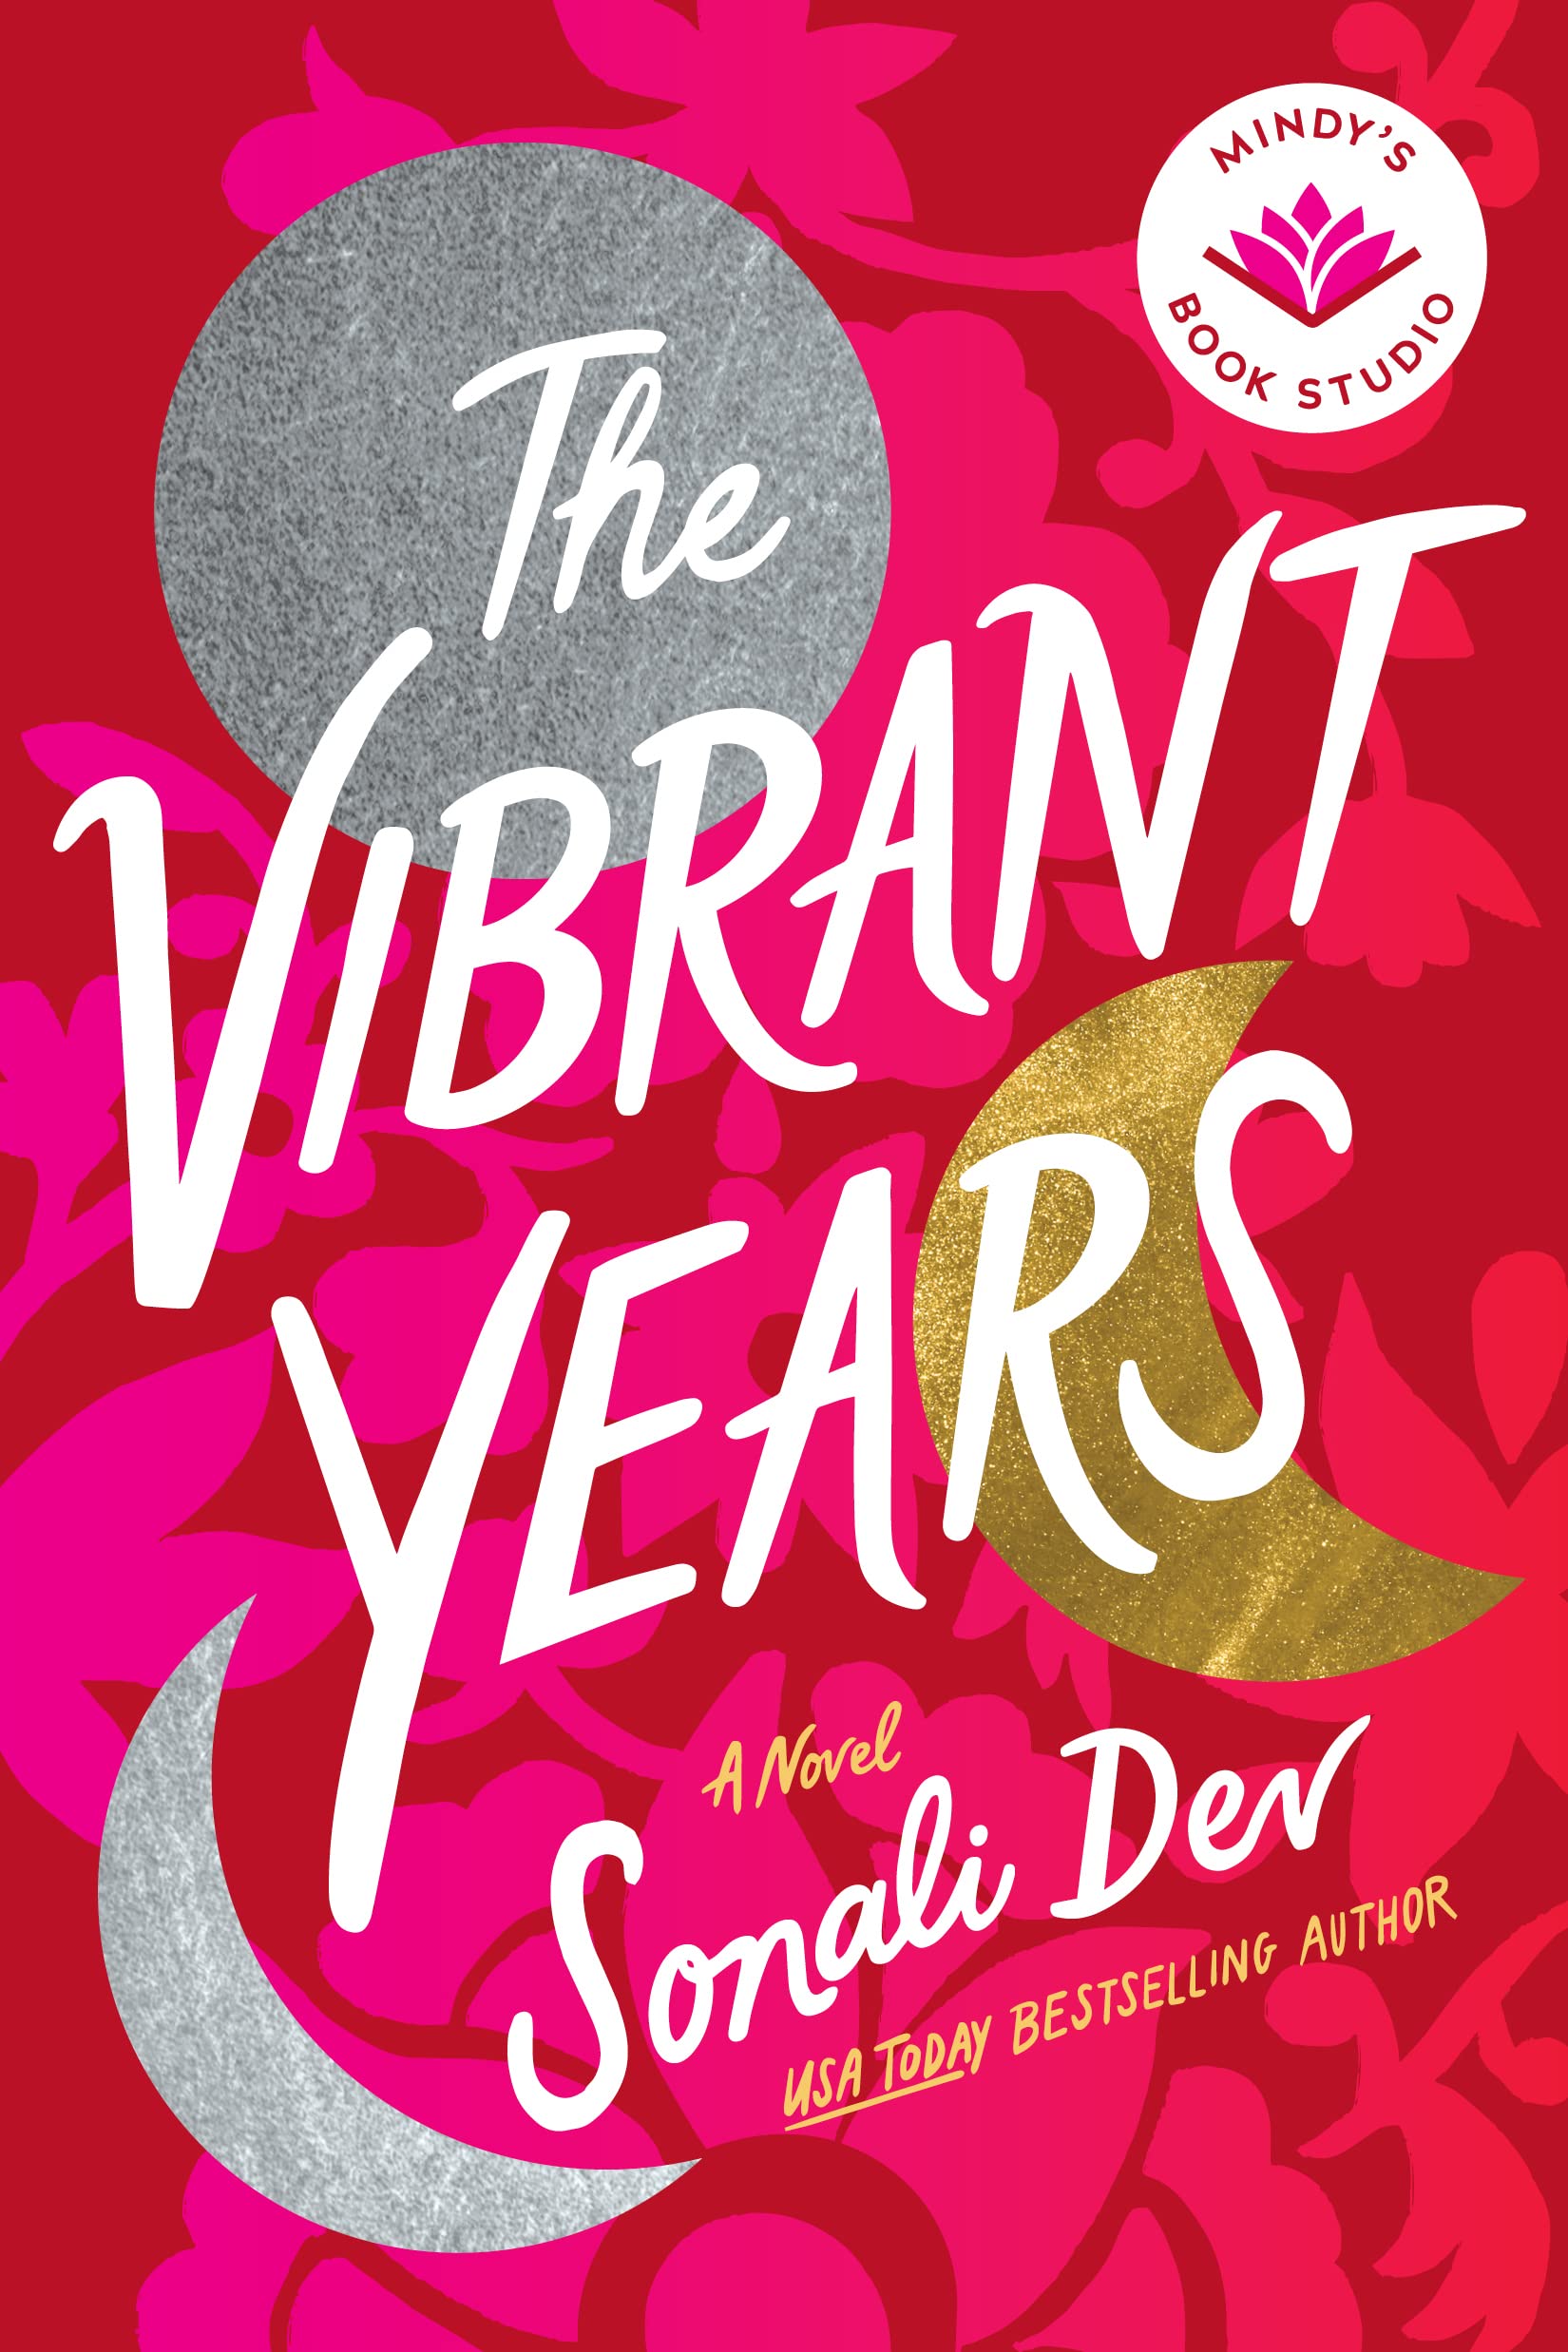 Image for "The Vibrant Years"